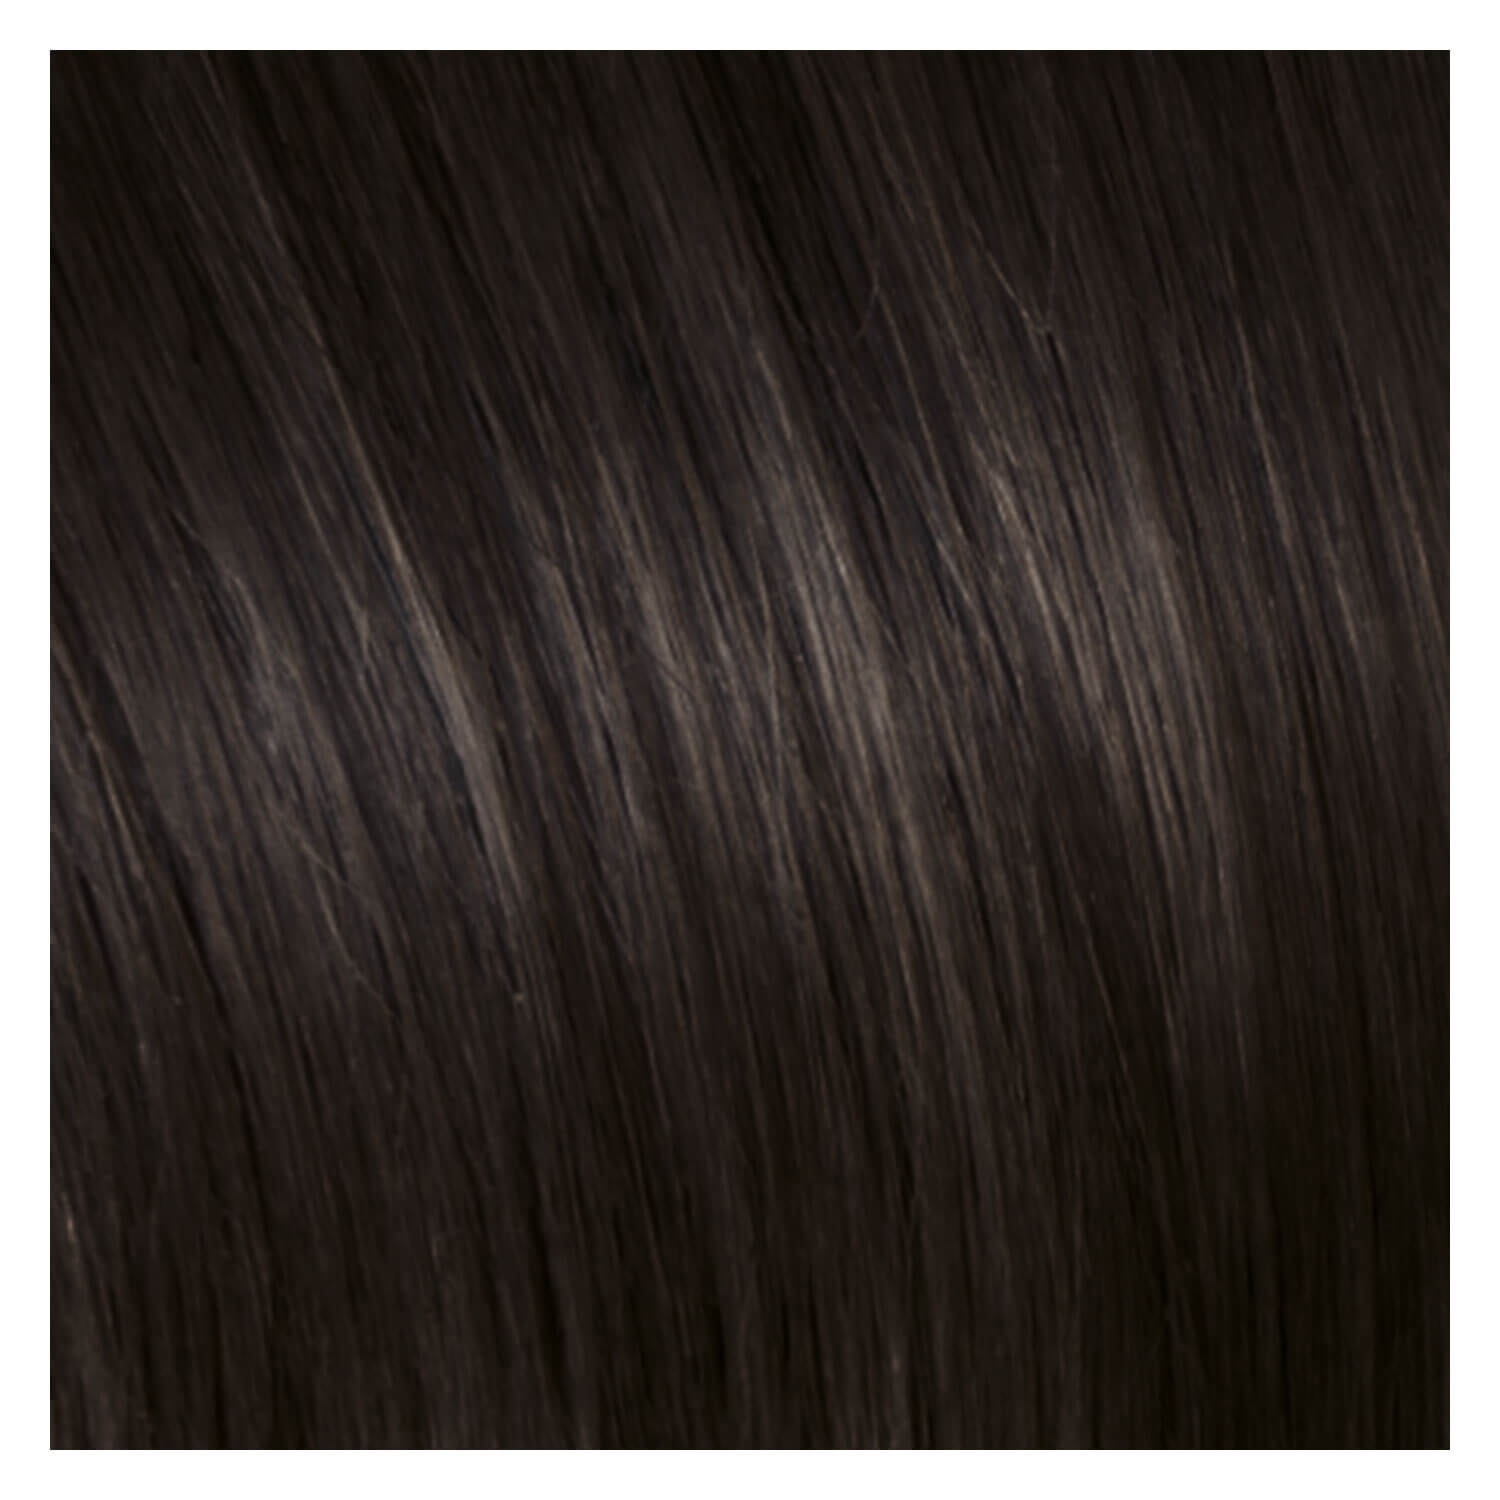 Product image from SHE Clip In-System Hair Extensions - 9-teiliges Set 4 Kastanienbraun 50/55cm